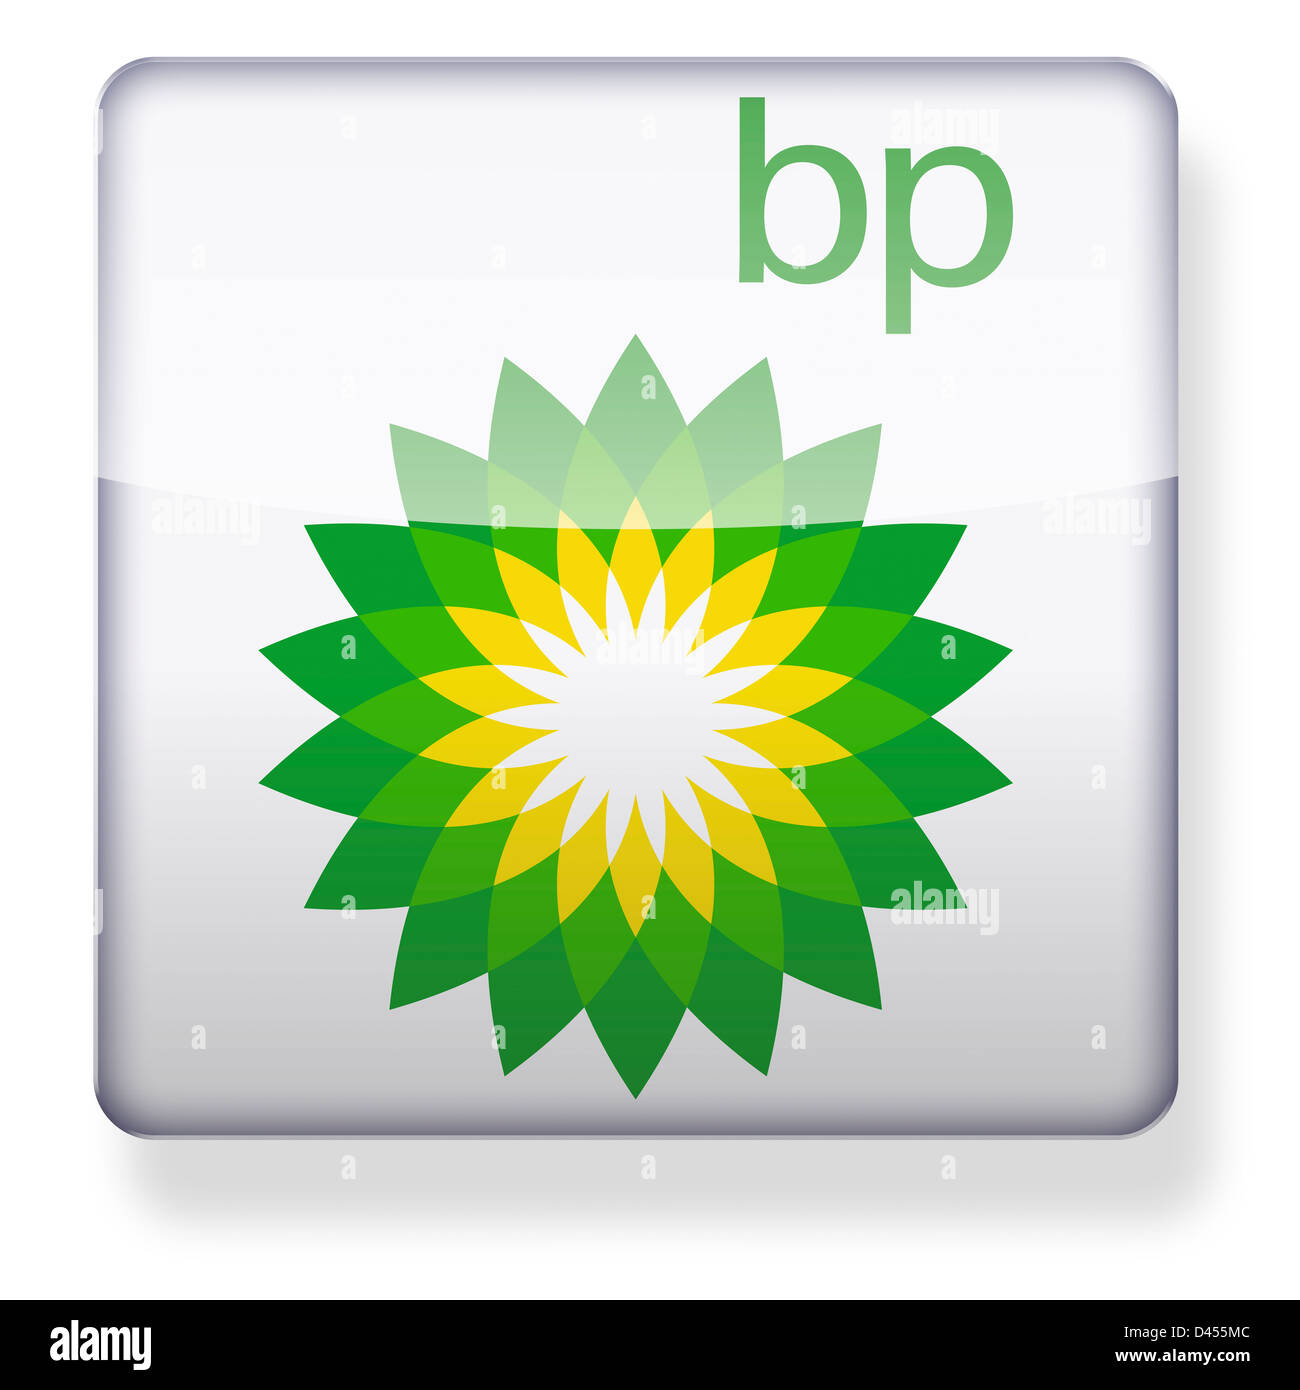 BP logo as an app icon. Clipping path included. Stock Photo